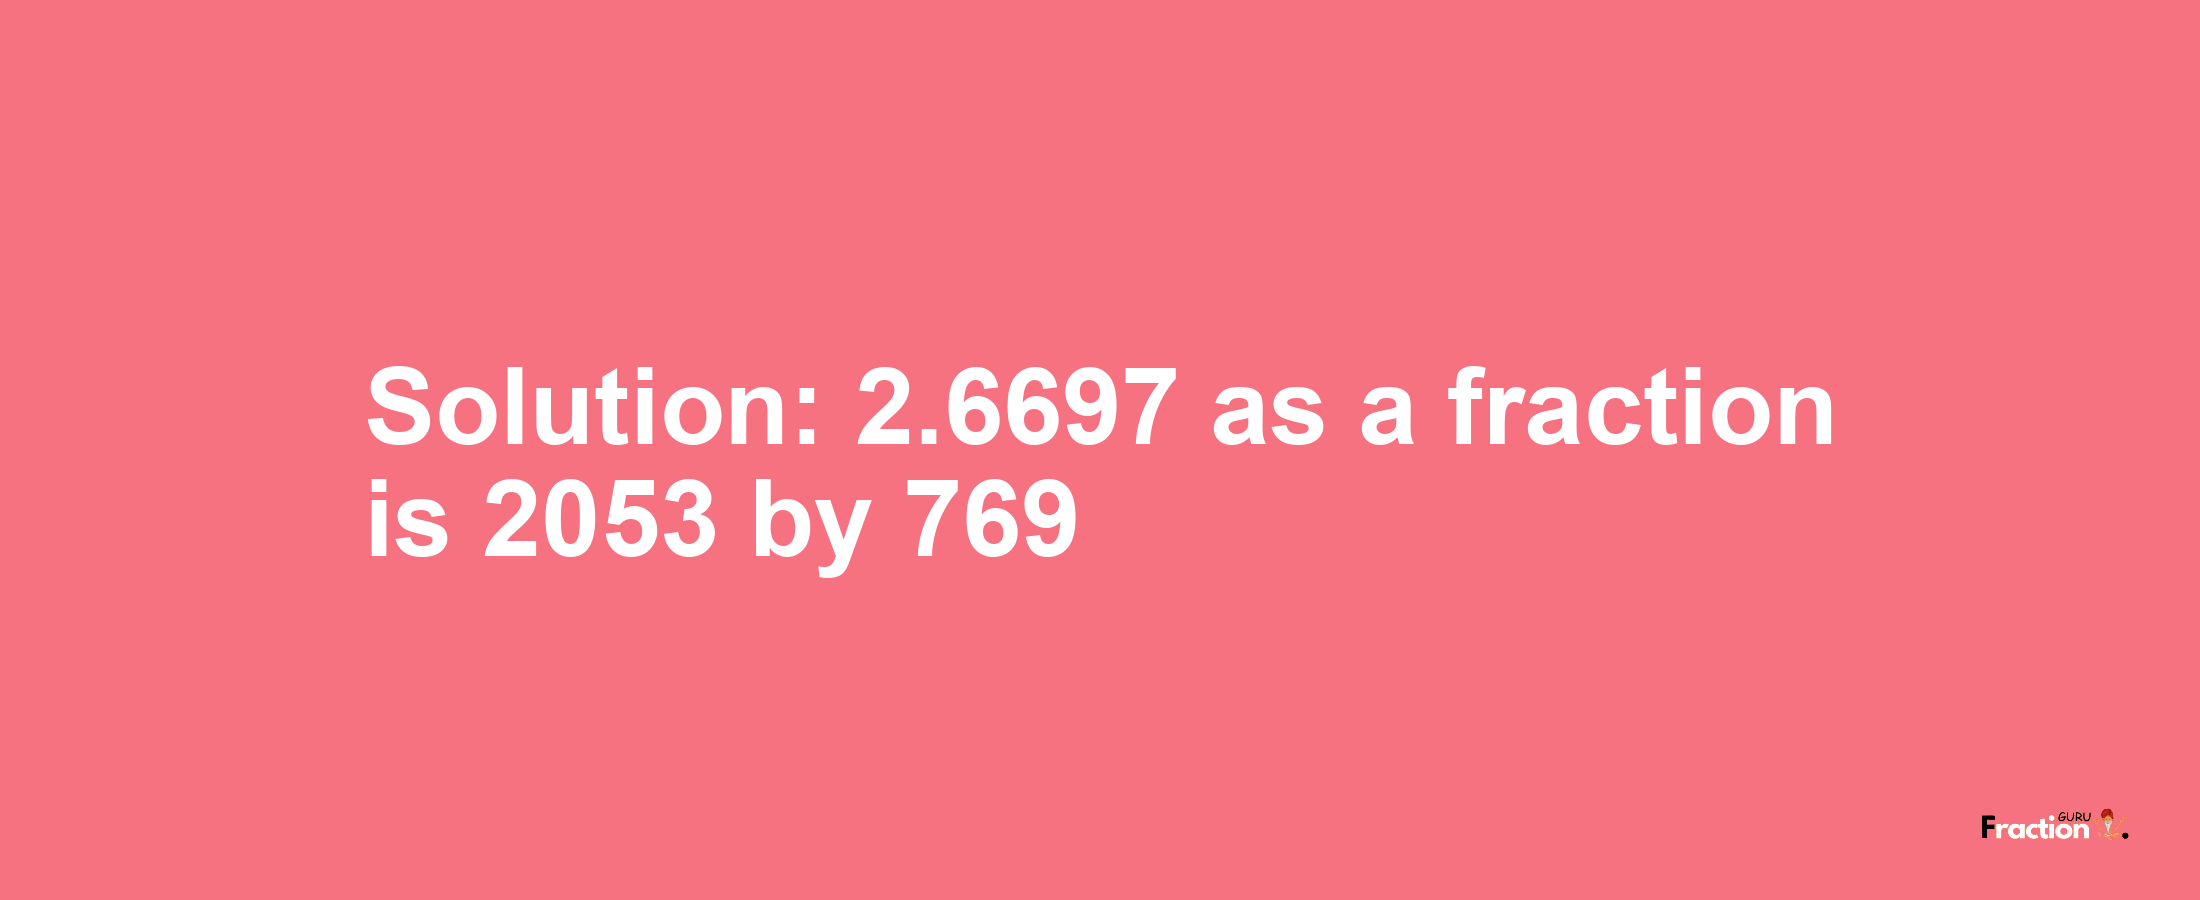 Solution:2.6697 as a fraction is 2053/769